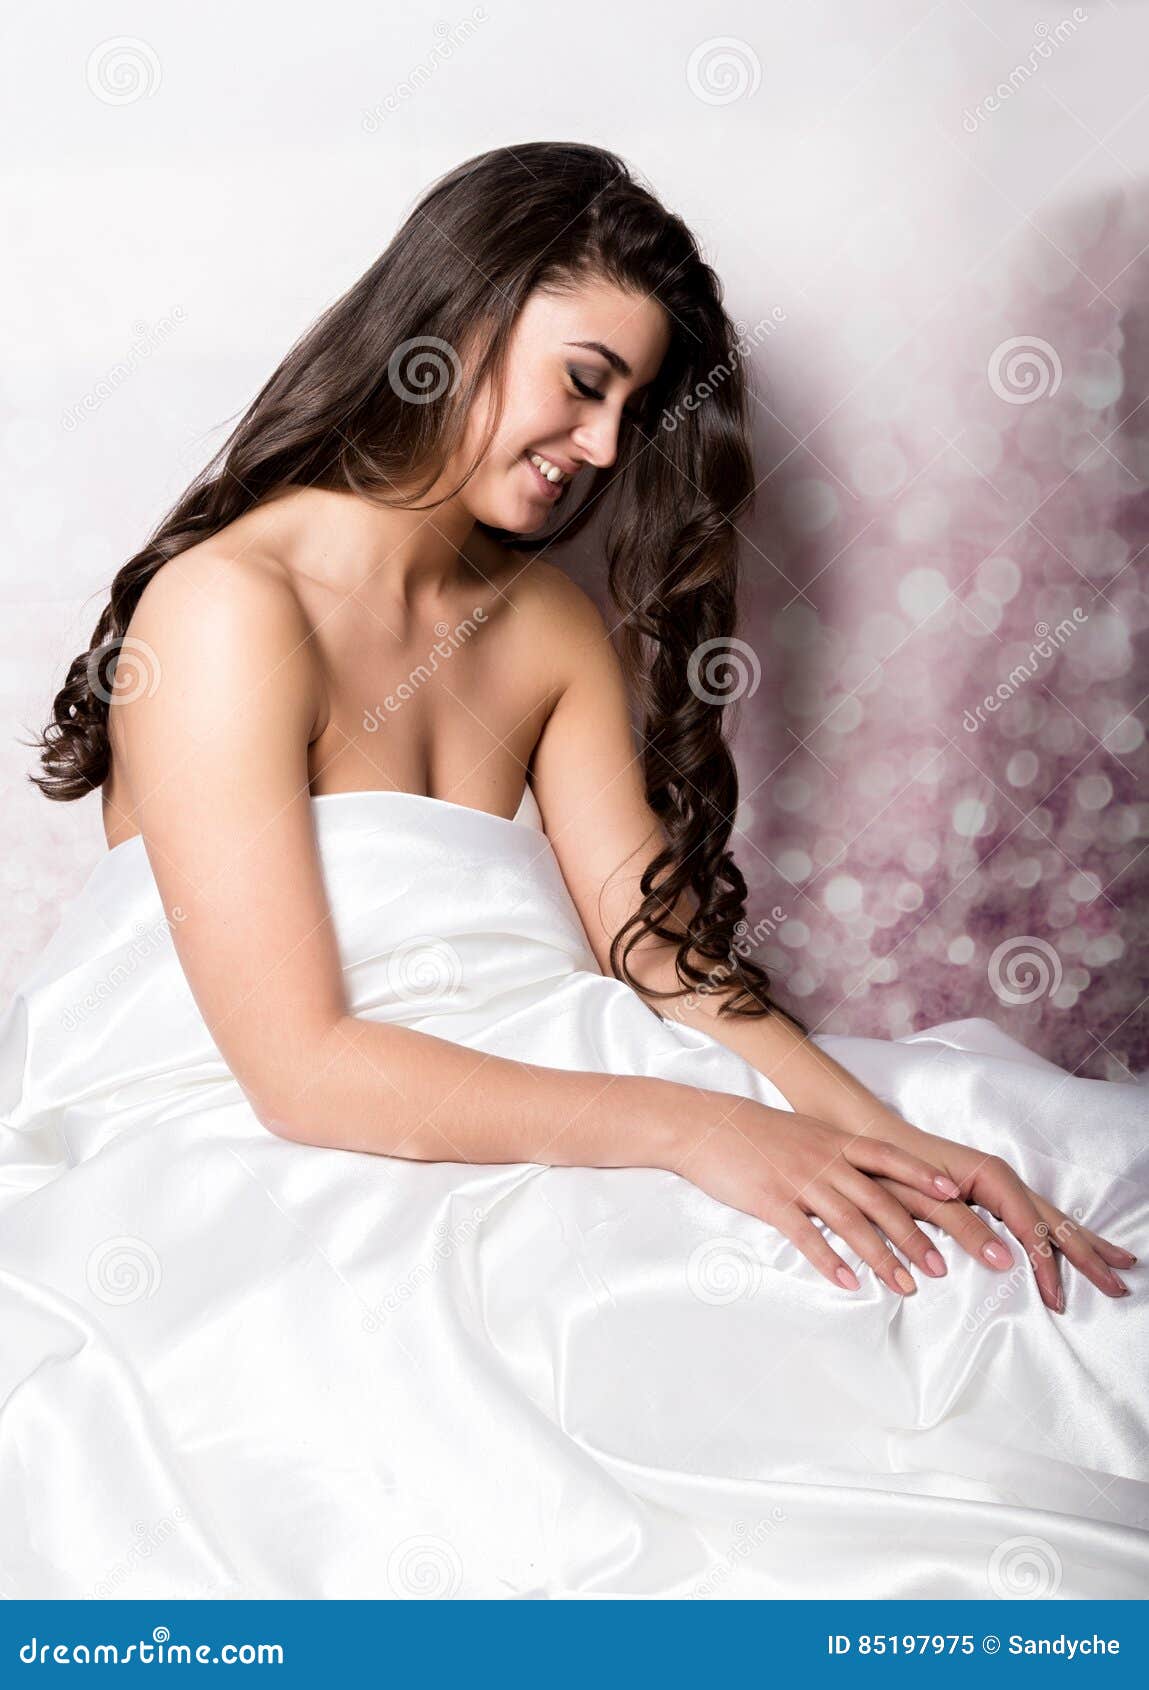 Pretty Female In Peignoir Sleeping On Bed Under Silk Sheets Stock Image